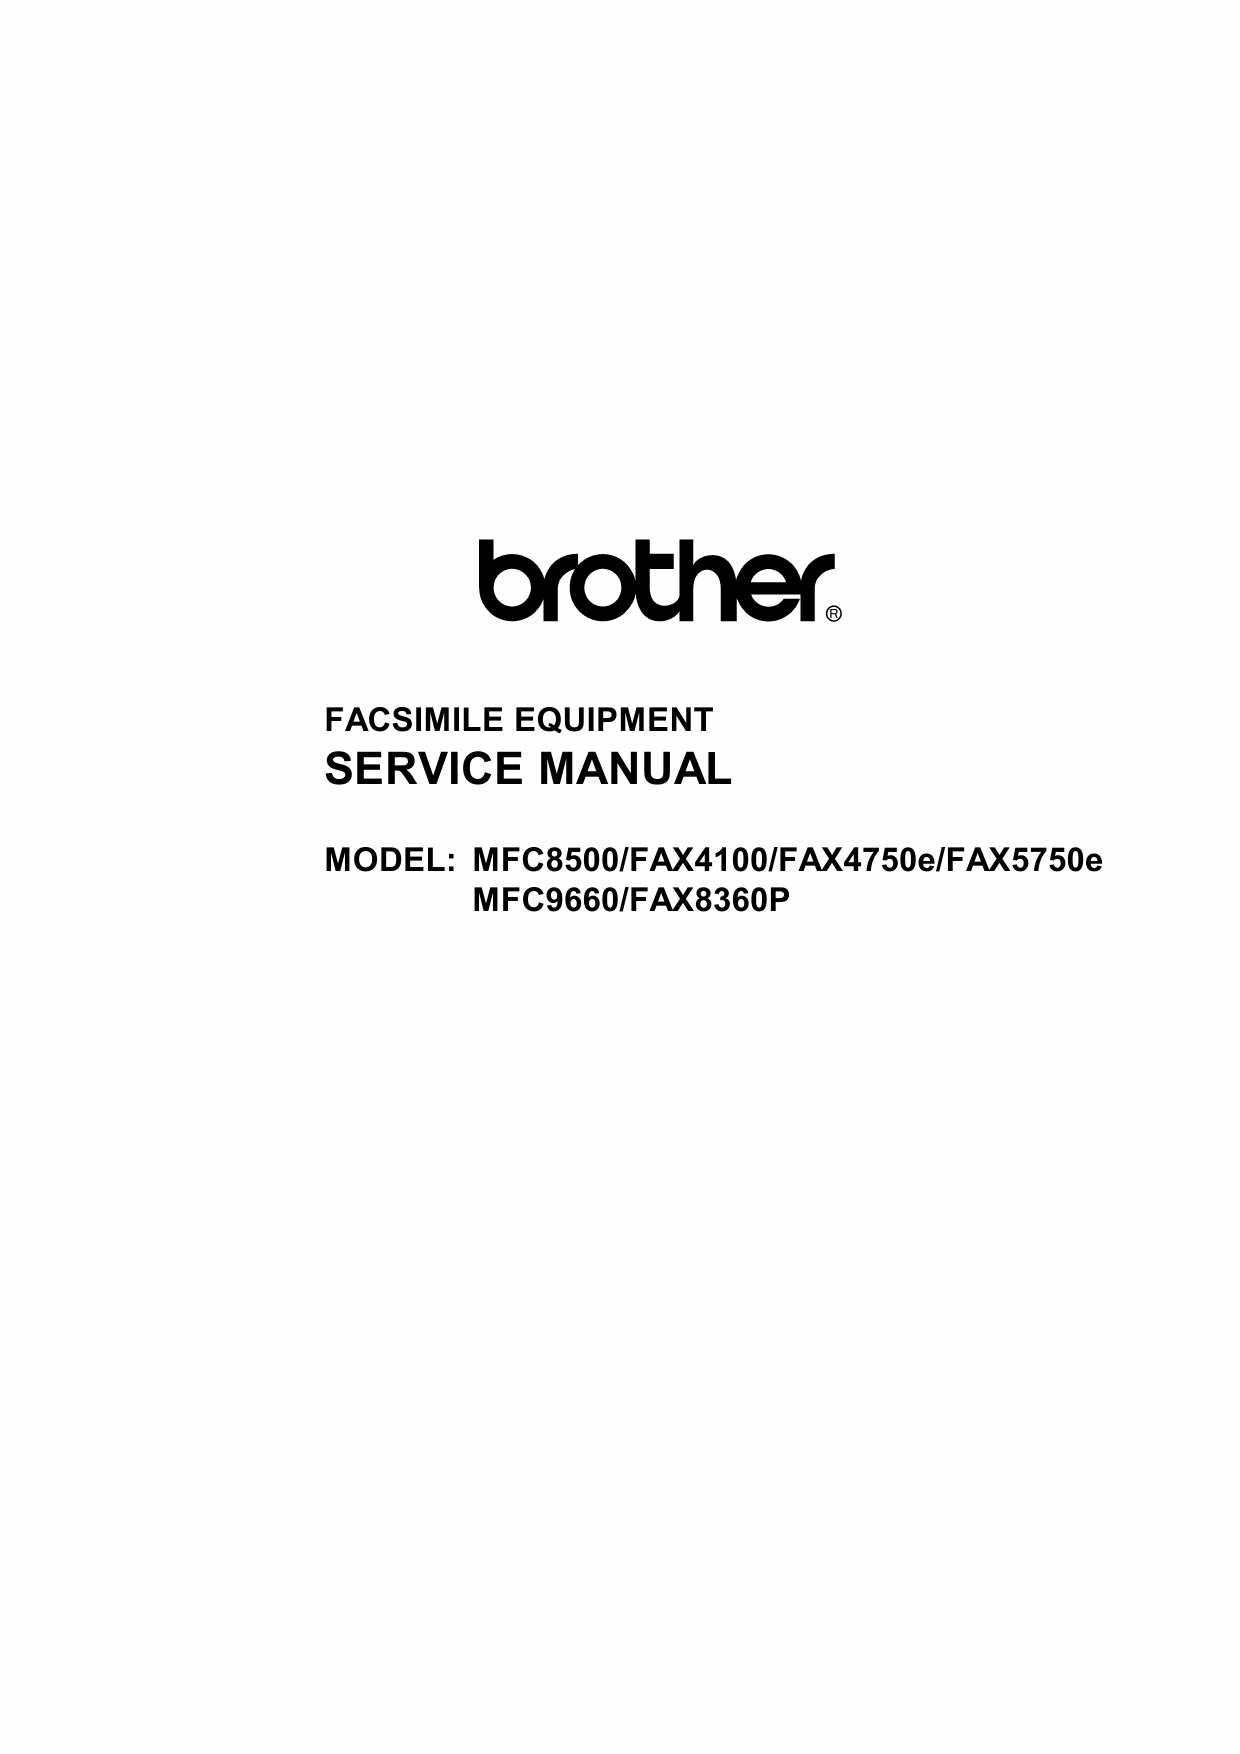 Brother MFC 8500 9660 FAX4100 5750 8360 Service Manual-1